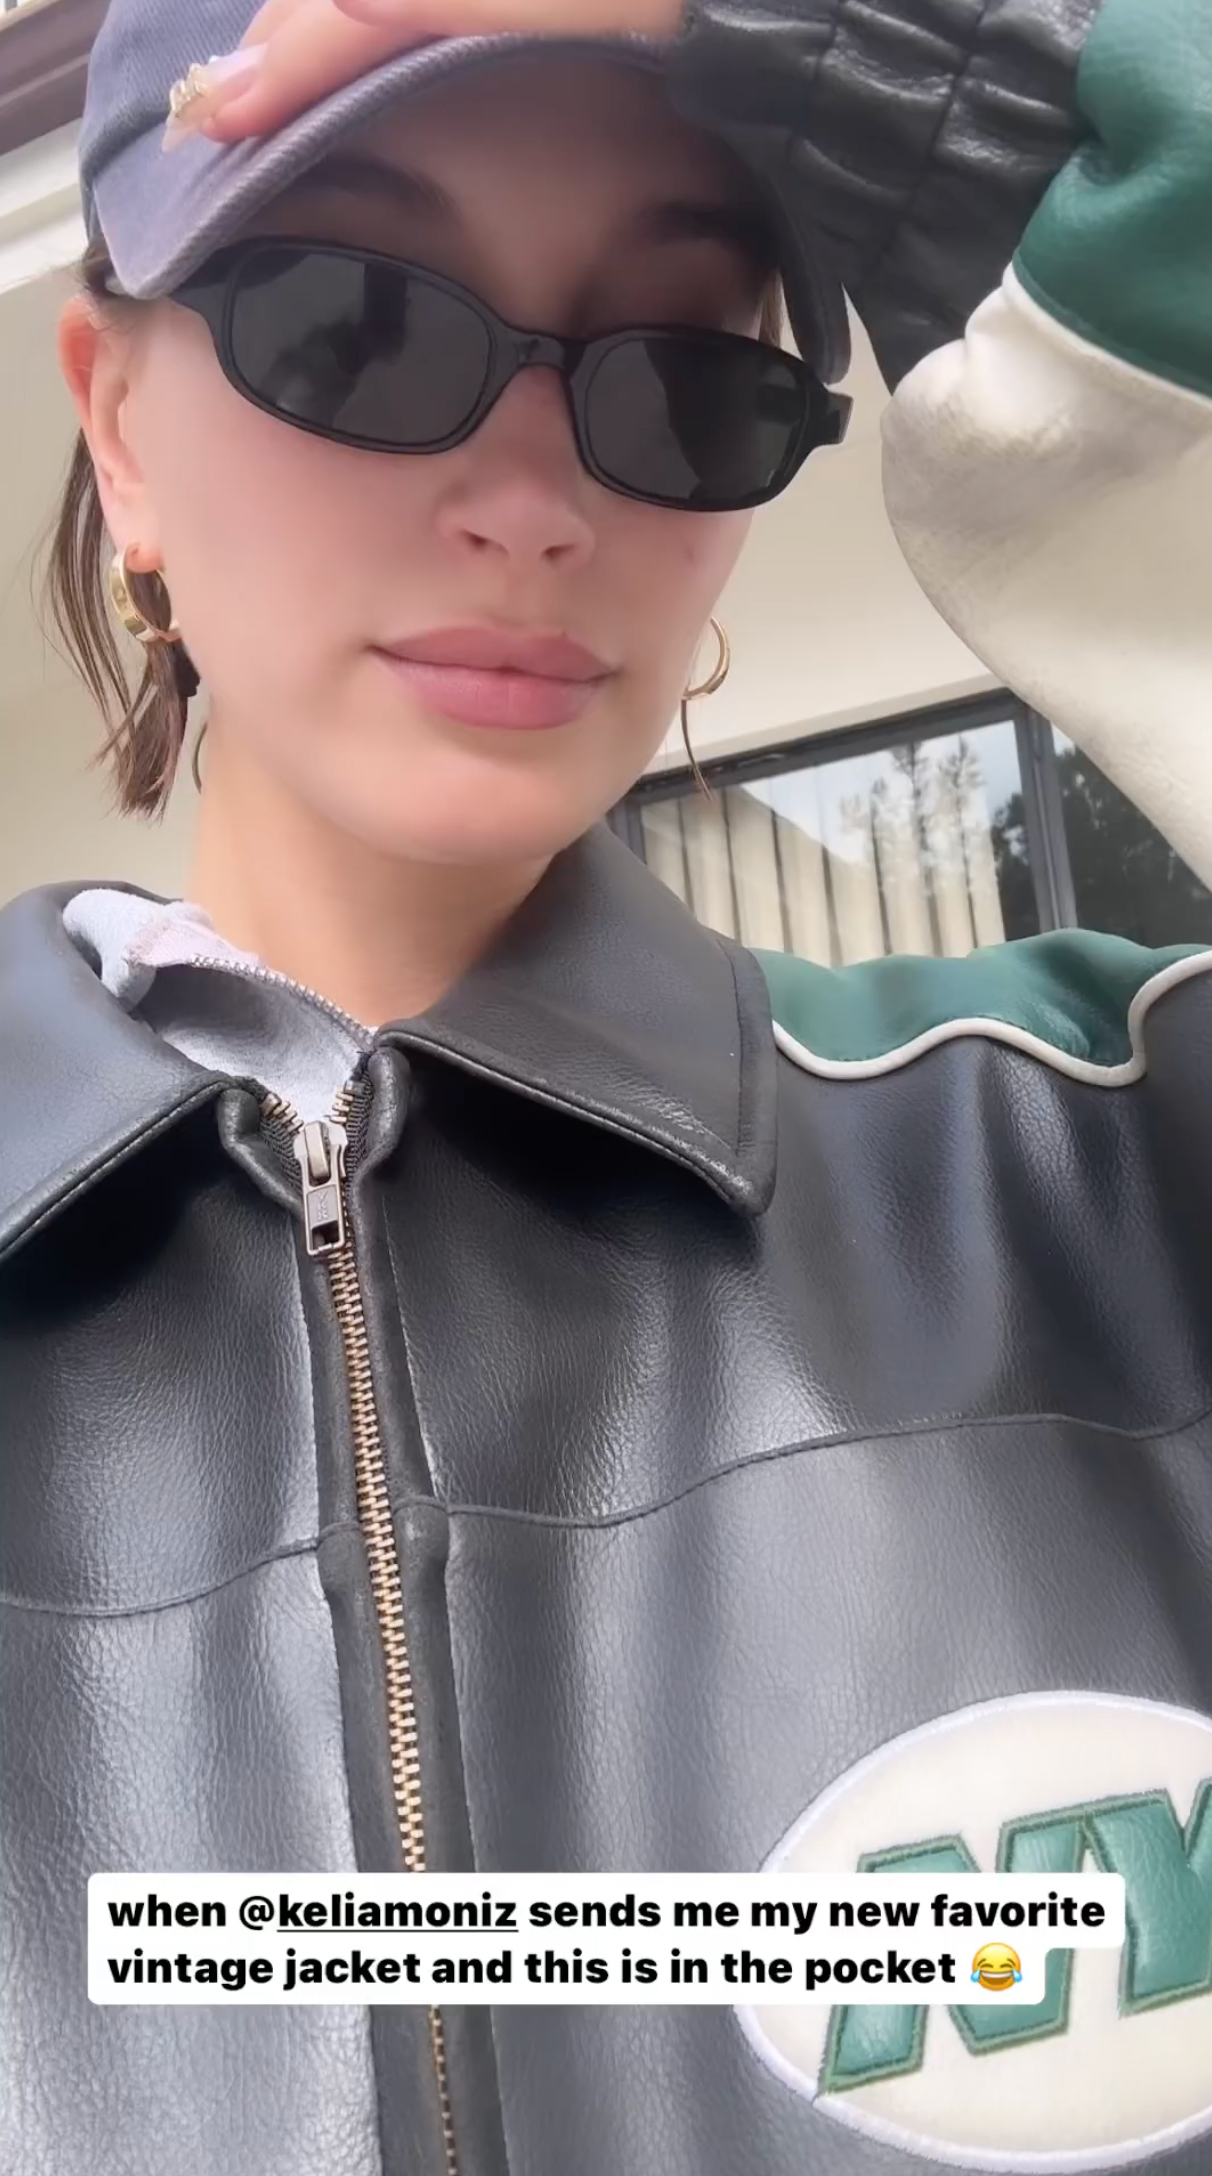 Hailey's clip in her Instagram Stories appeared to show her just showcasing her outfit for the day